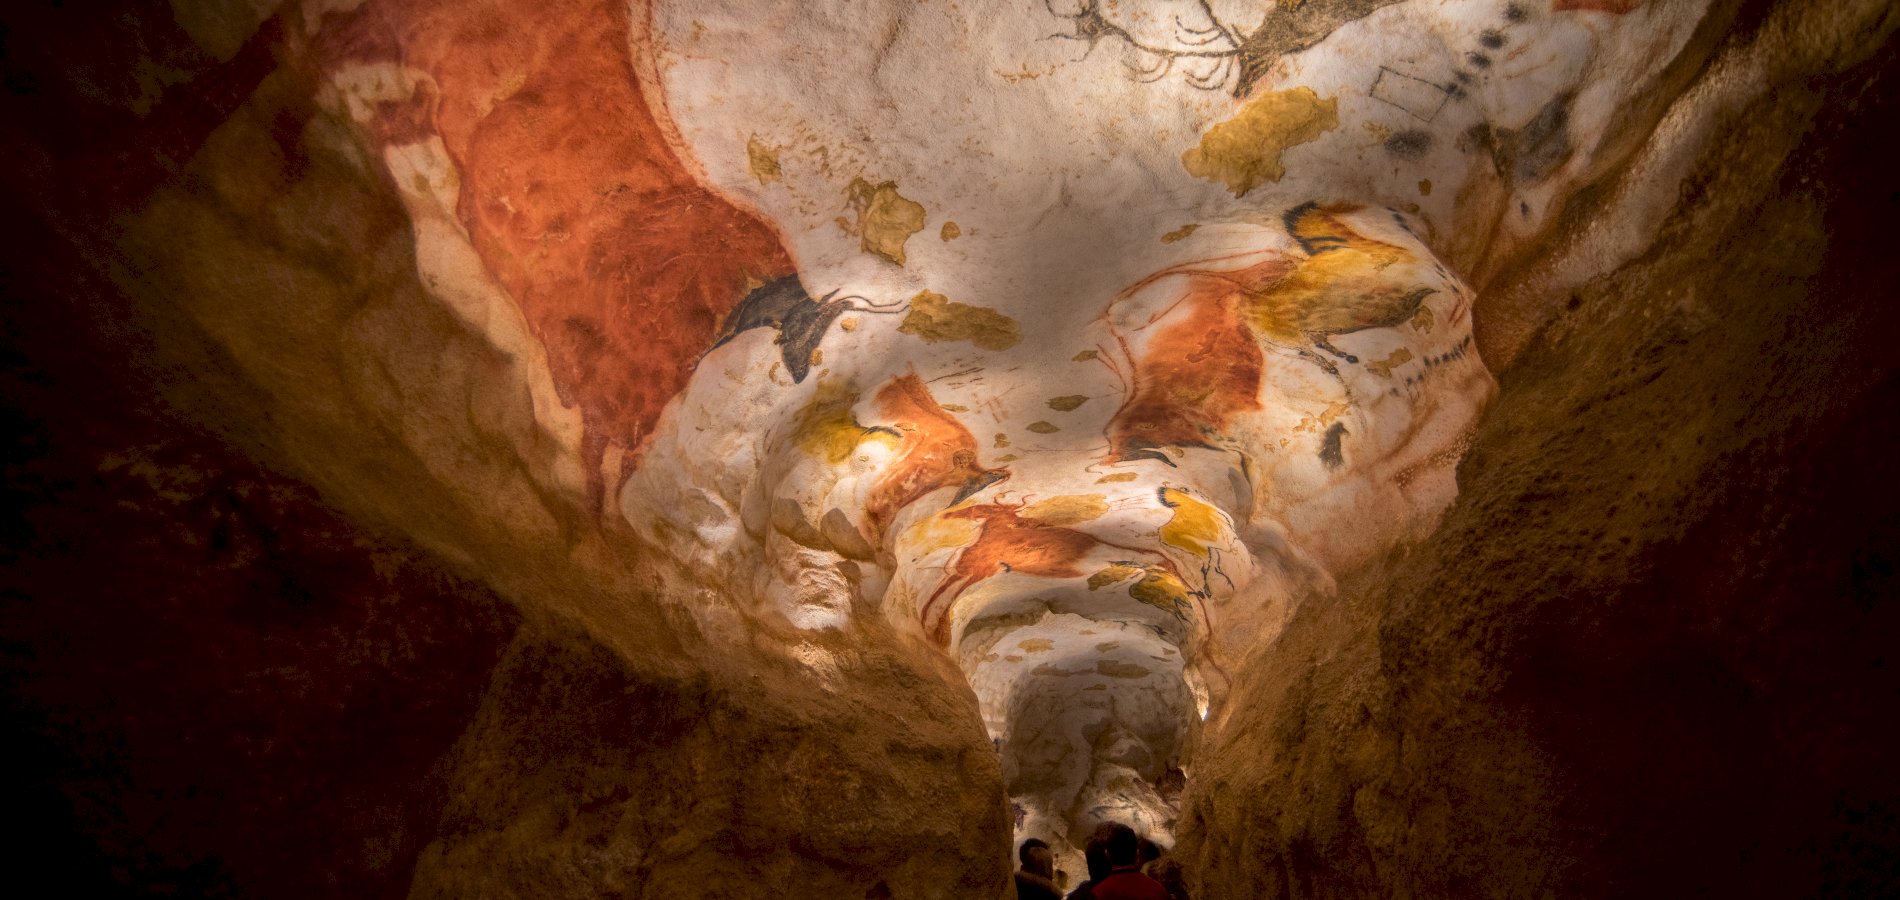 Ophorus Tours - A Half Day Trip From Sarlat to Lascaux IV Museum & Cave